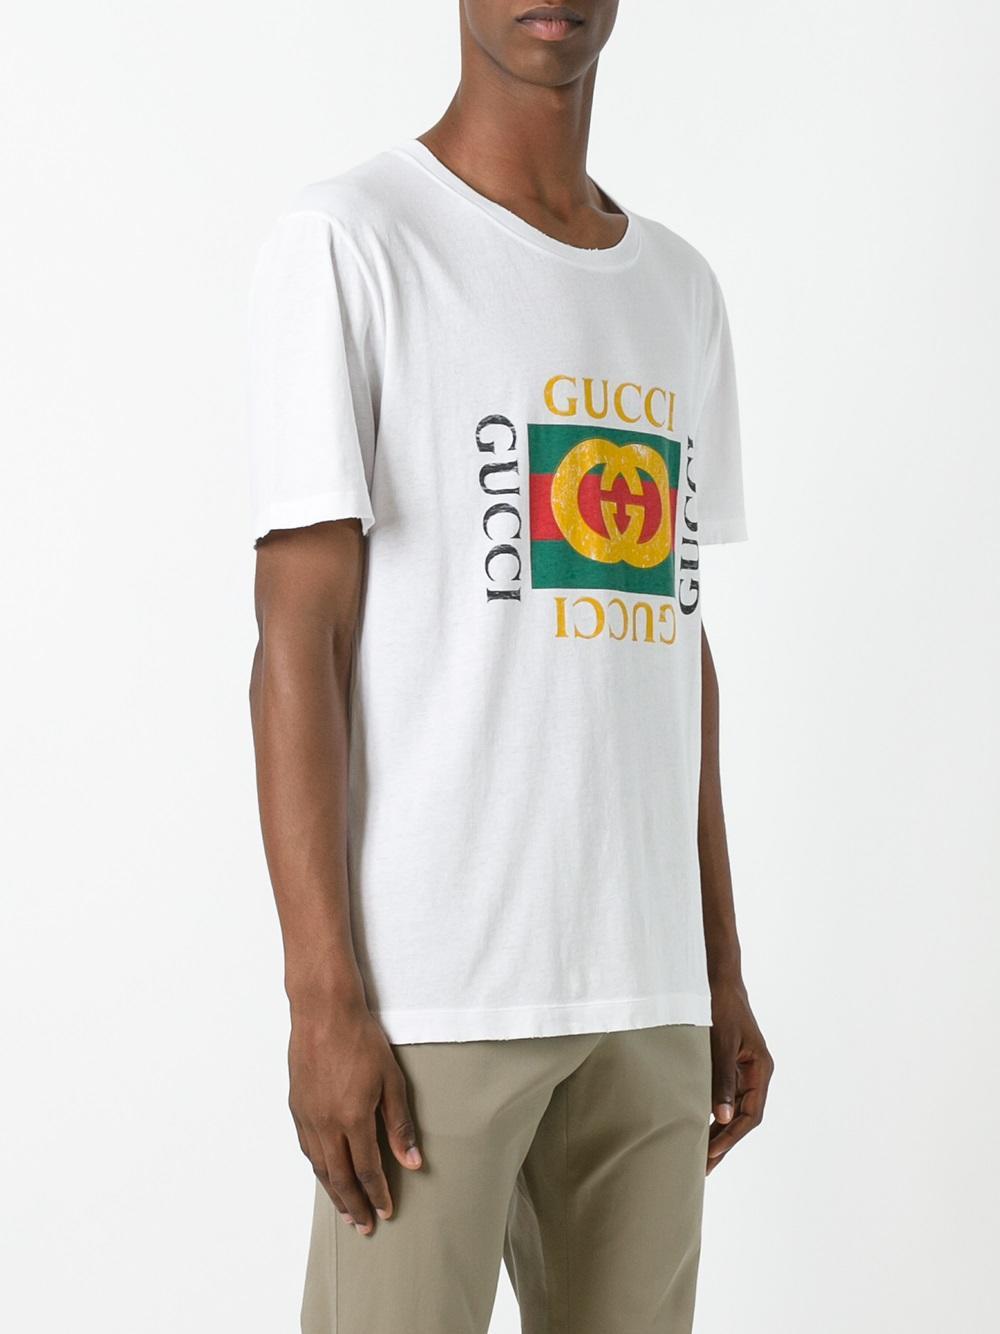 Lyst - Gucci Print T-shirt in White for Men